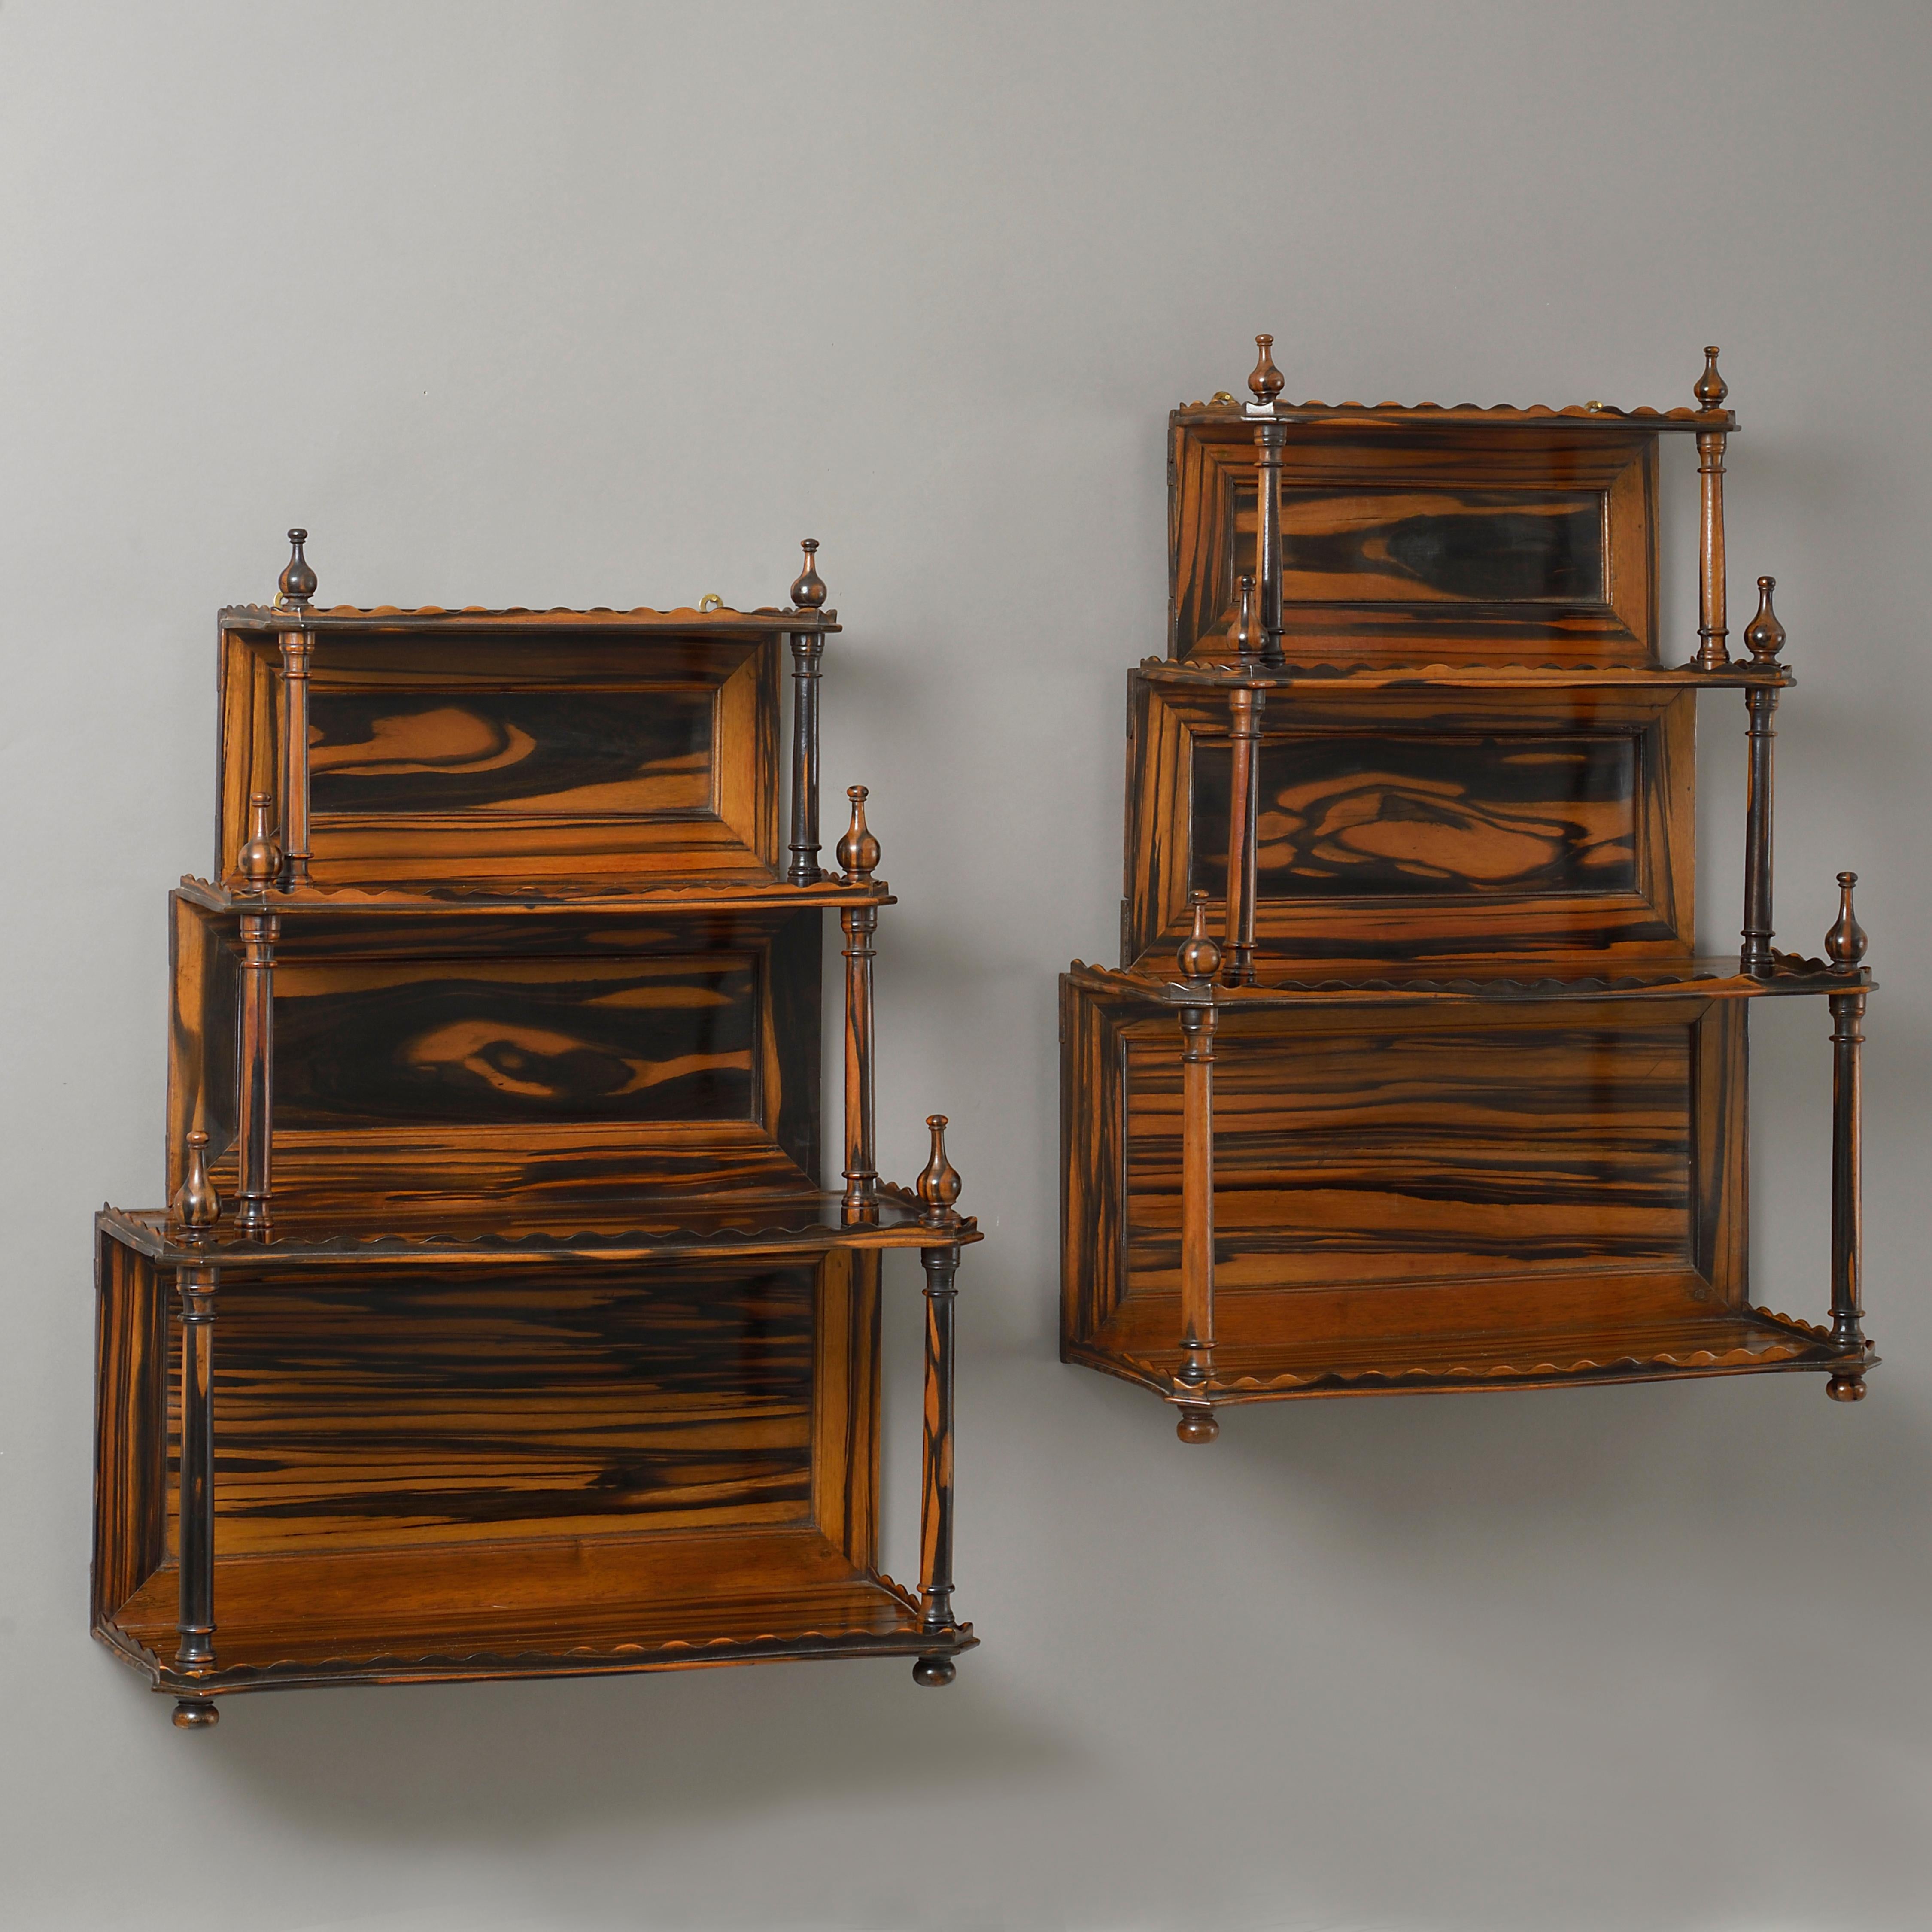 Anglo-Indian Pair of Mid-19th Century Calamander Wood Hanging Shelves